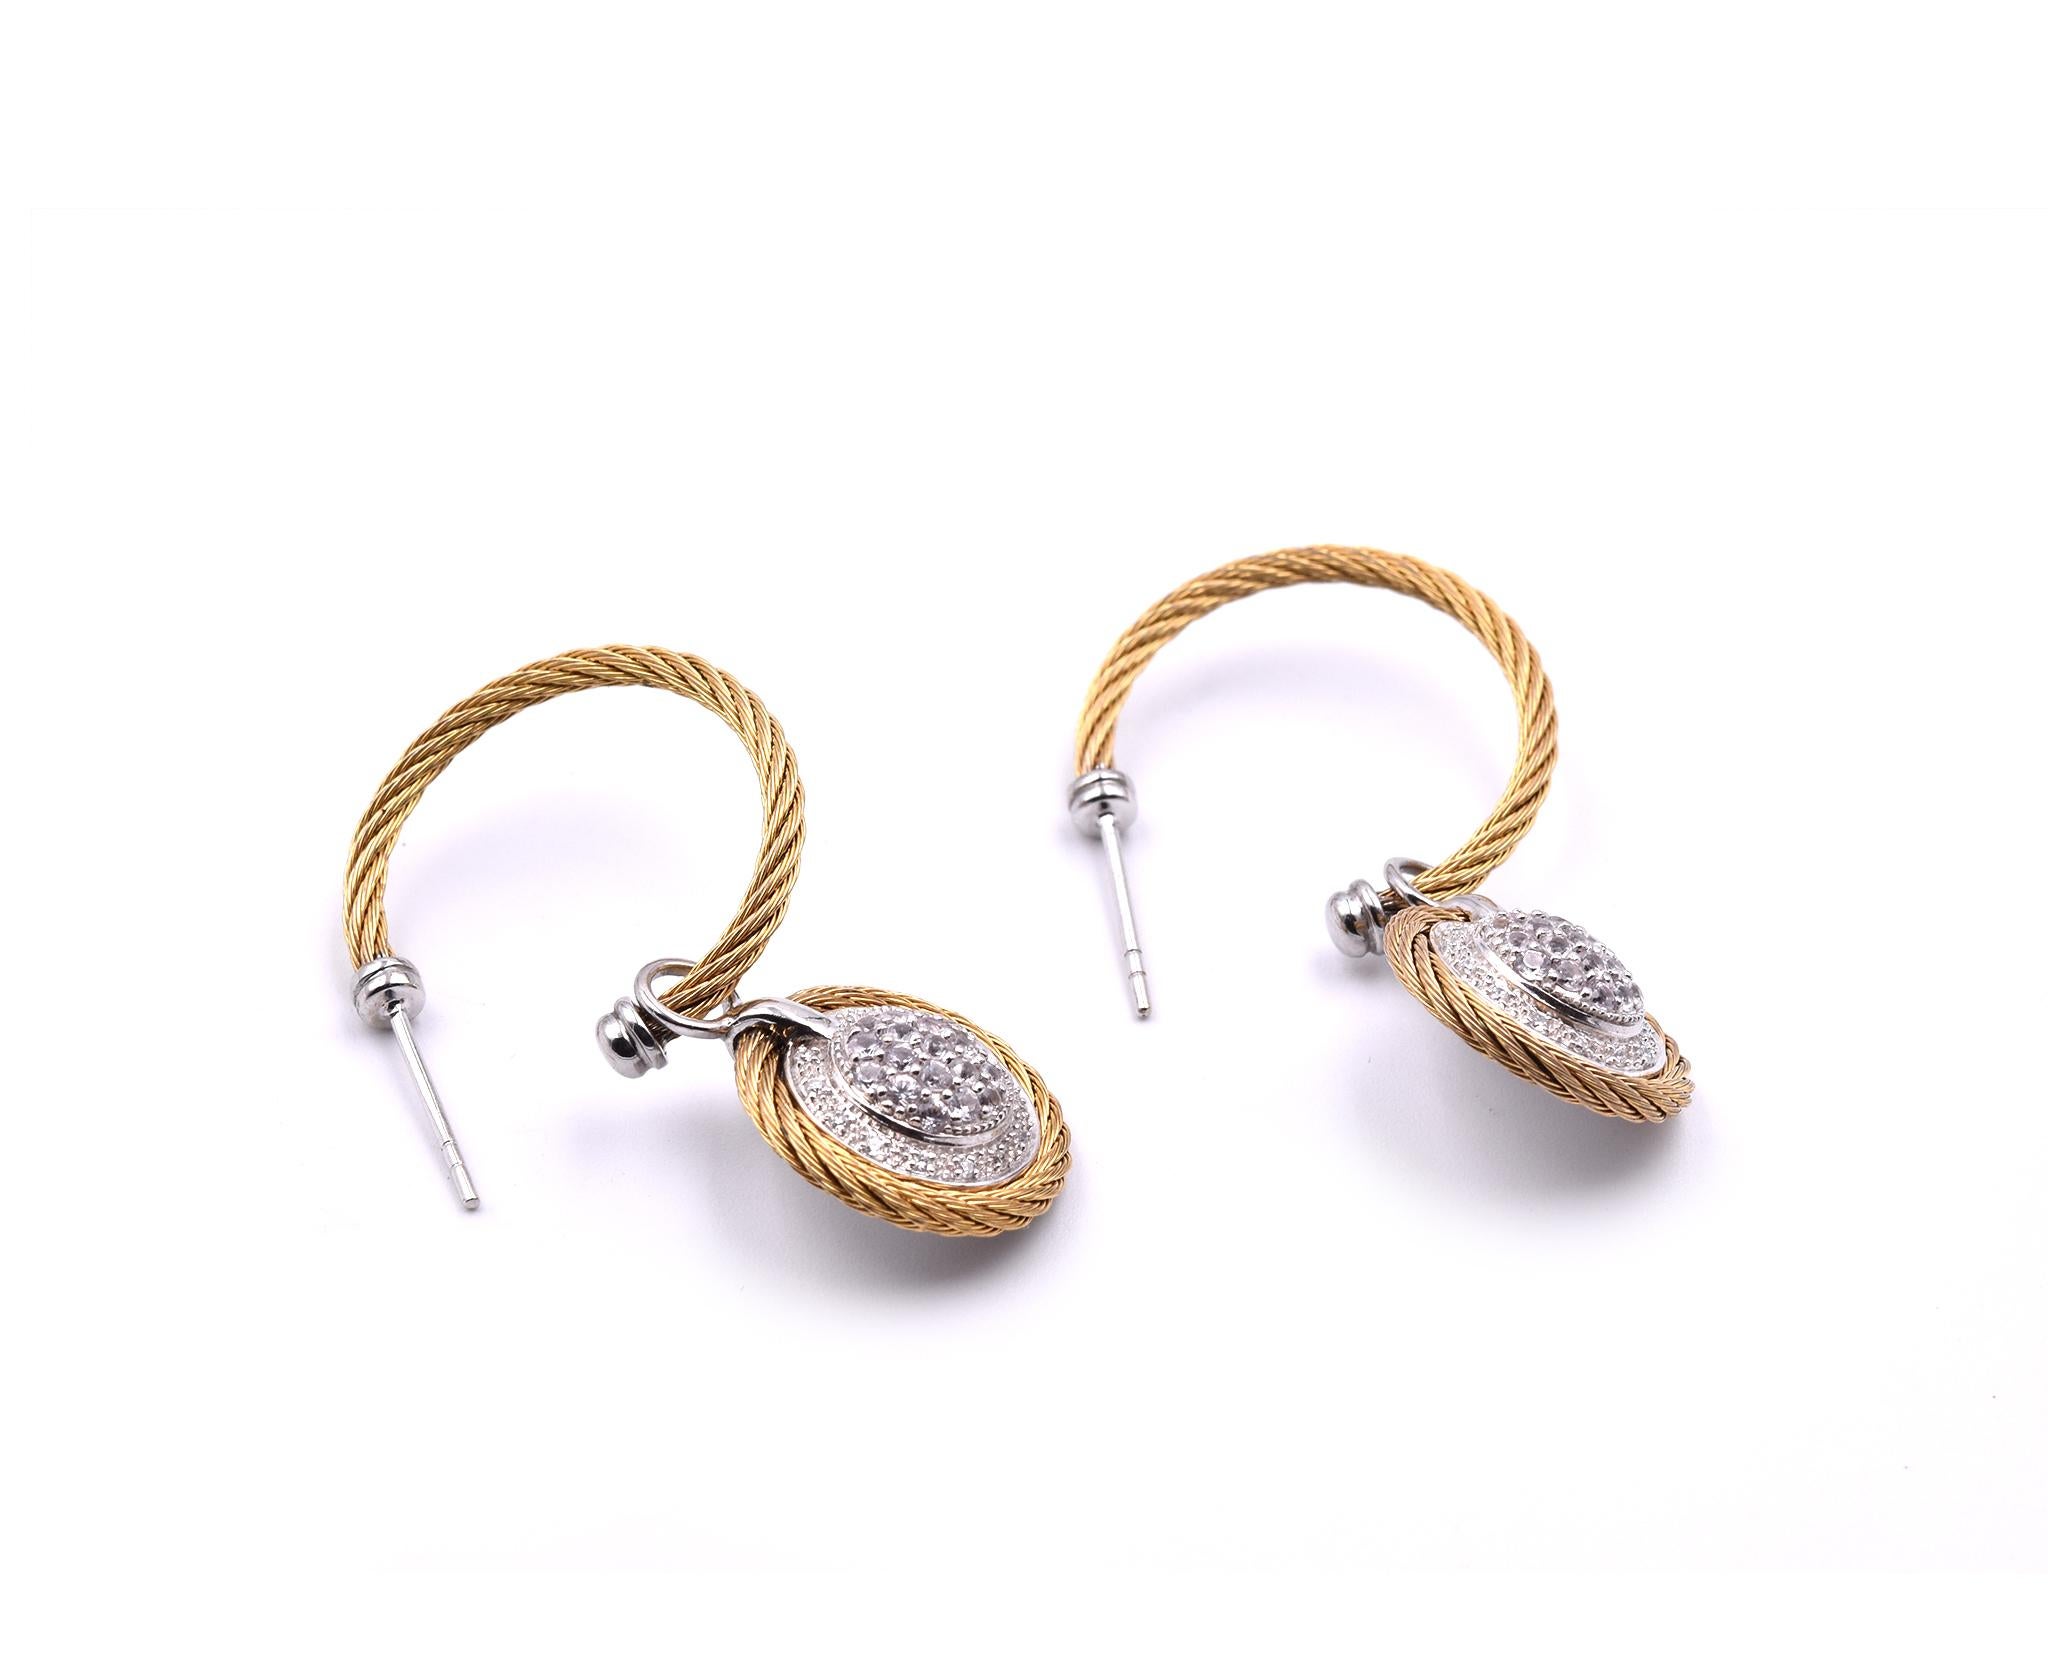 Designer: Charriol
Material: 18k yellow gold and stainless steel
Diamonds: 66 round brilliant cut=.70cttw
Color: G
Clarity: VS
Fastening: post with friction back
Dimensions: earrings are approximately 43mm long and 16.50mm wide
Weight: 9.27 grams